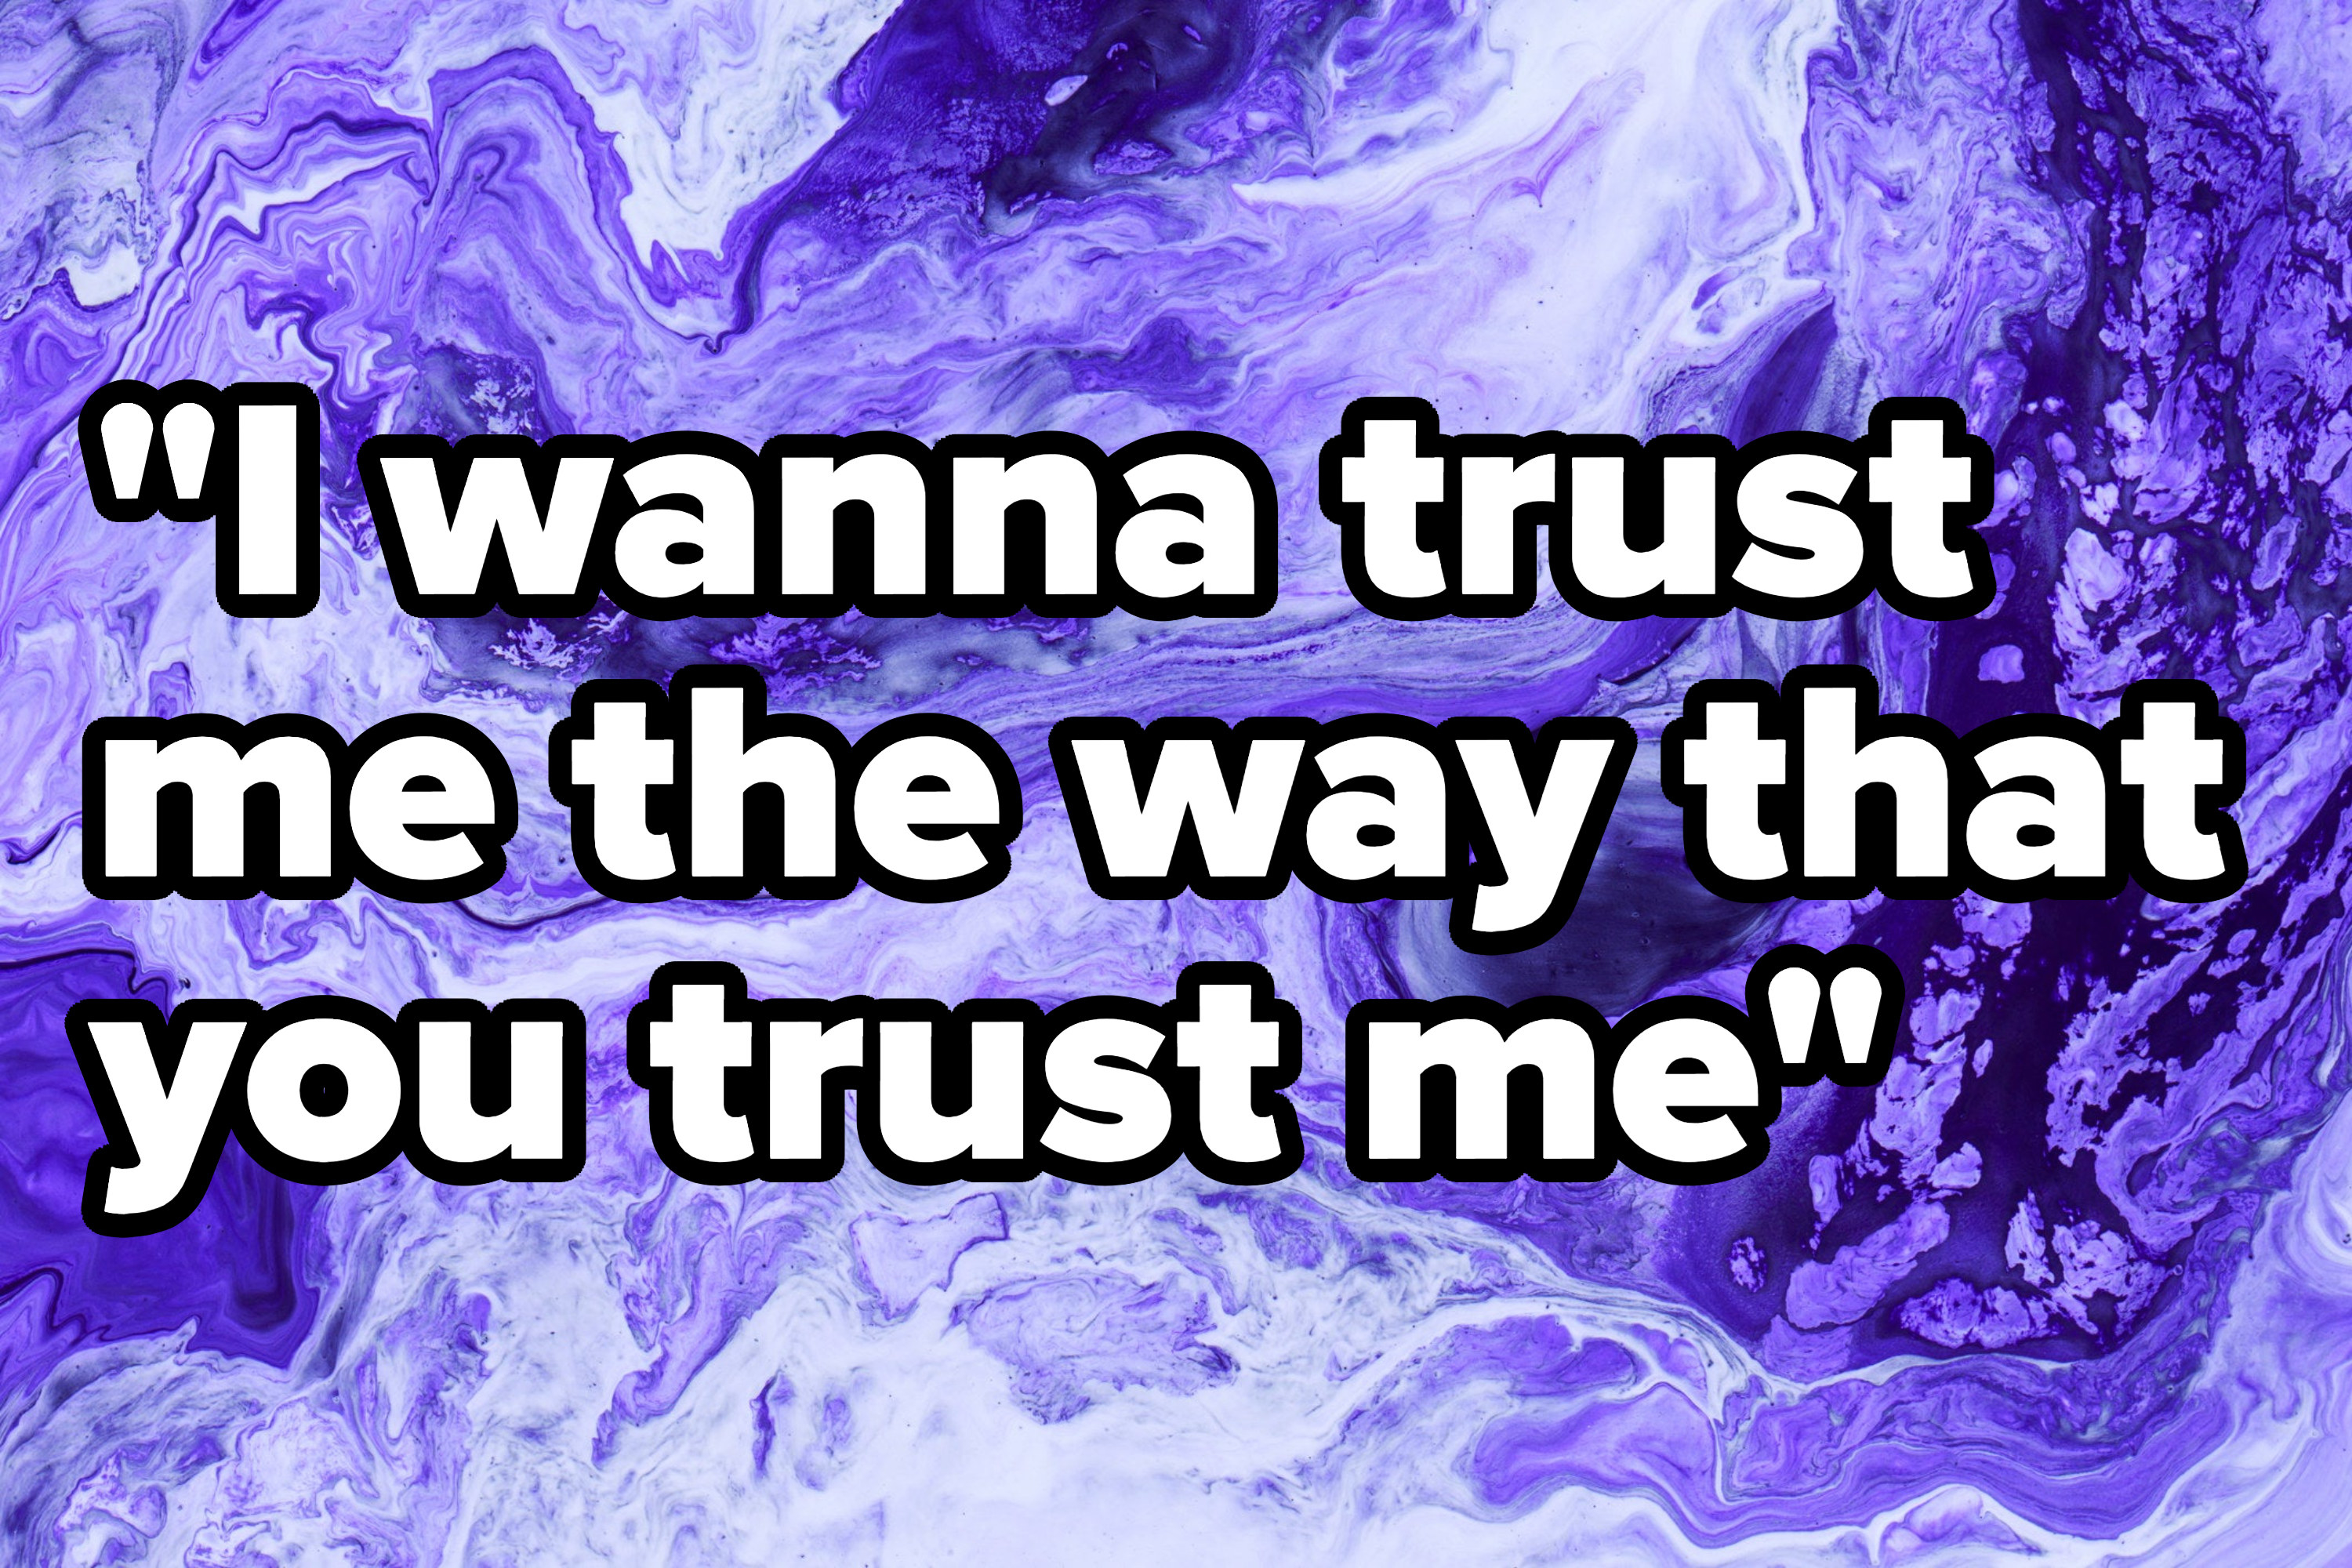 &quot;I wanna trust me the way that you trust me&quot; written over a marble design